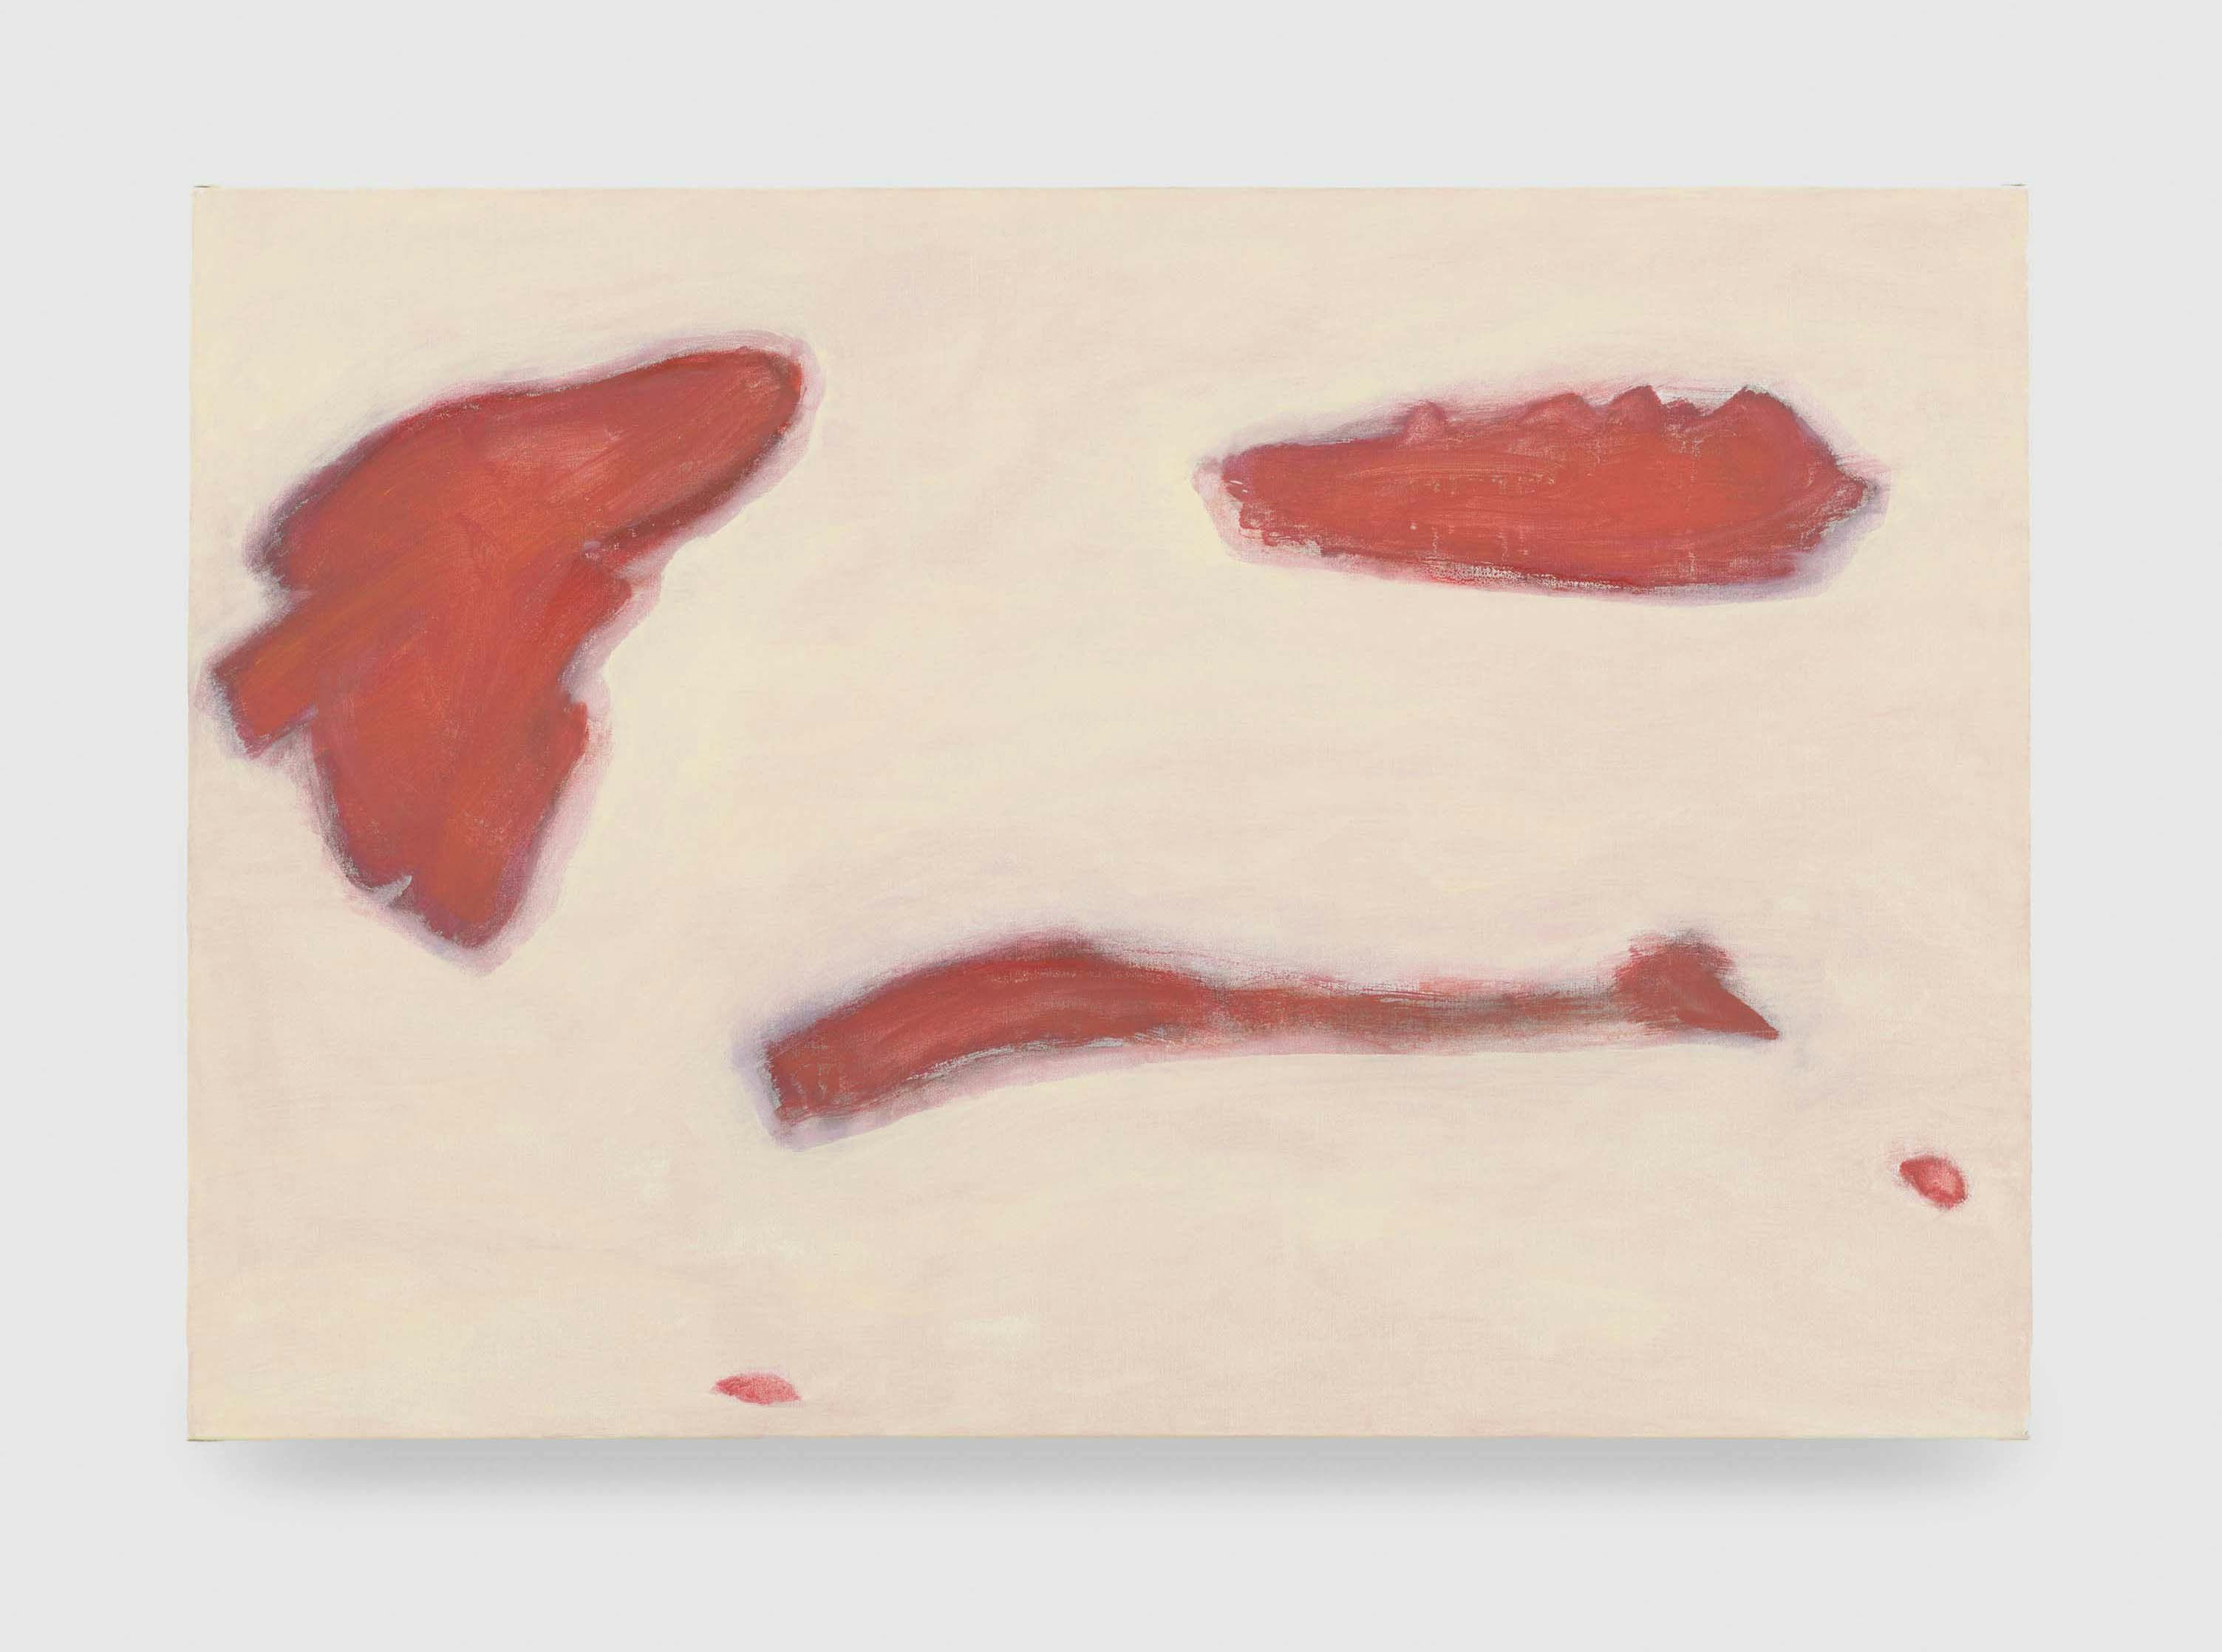 A painting by Raoul De Keyser, titled Trio in Red, dated 2006.